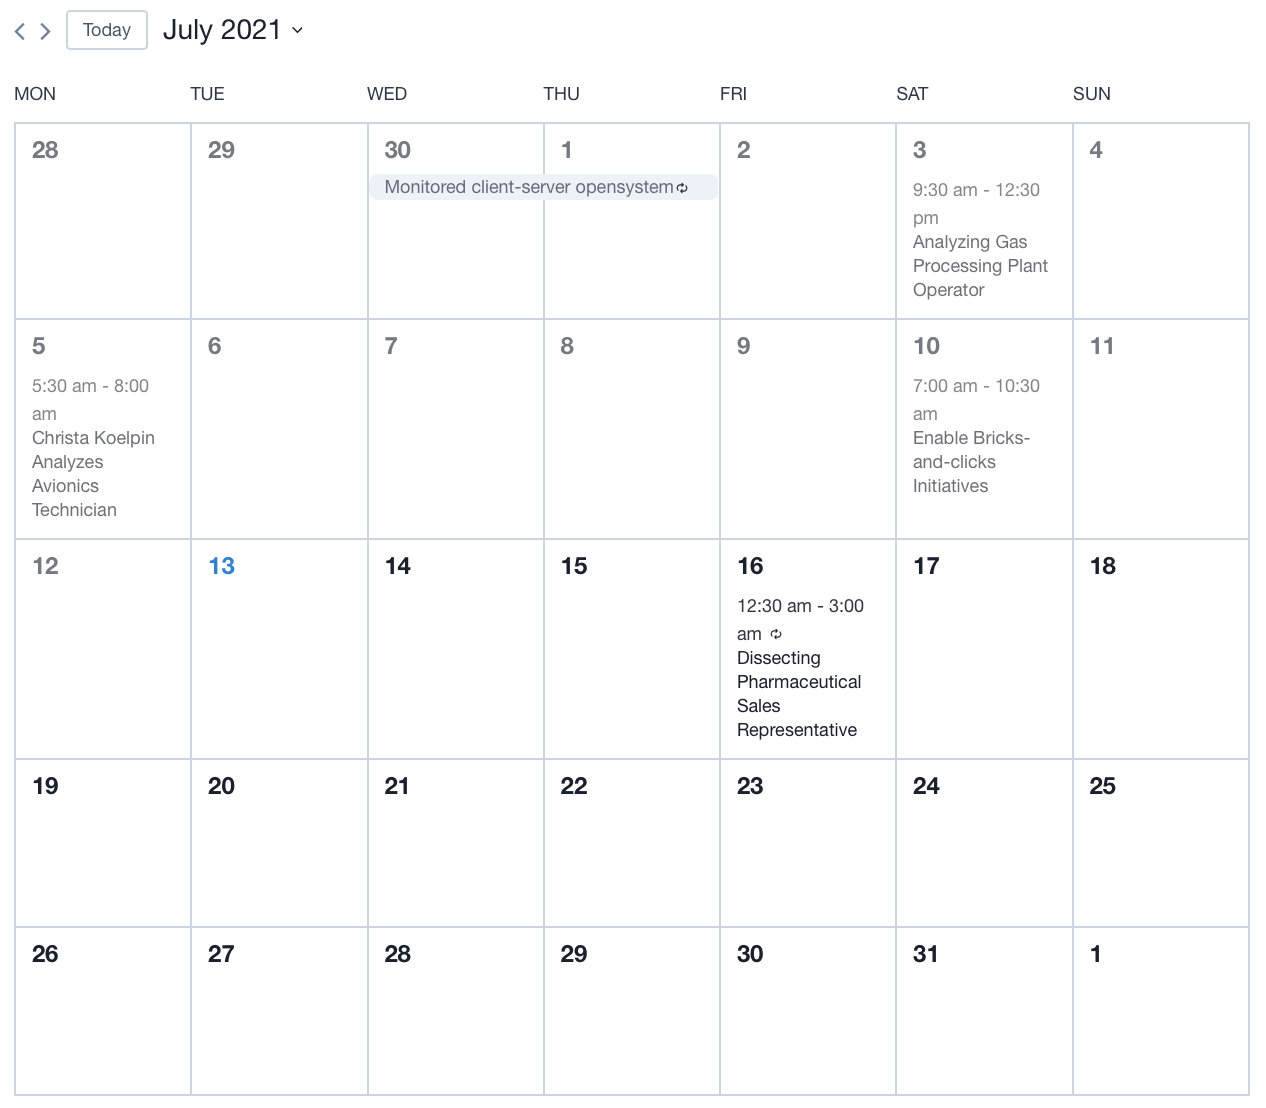 Showing the calendar in month view for July 2021. There are five events on the calendar showing times and event titles.